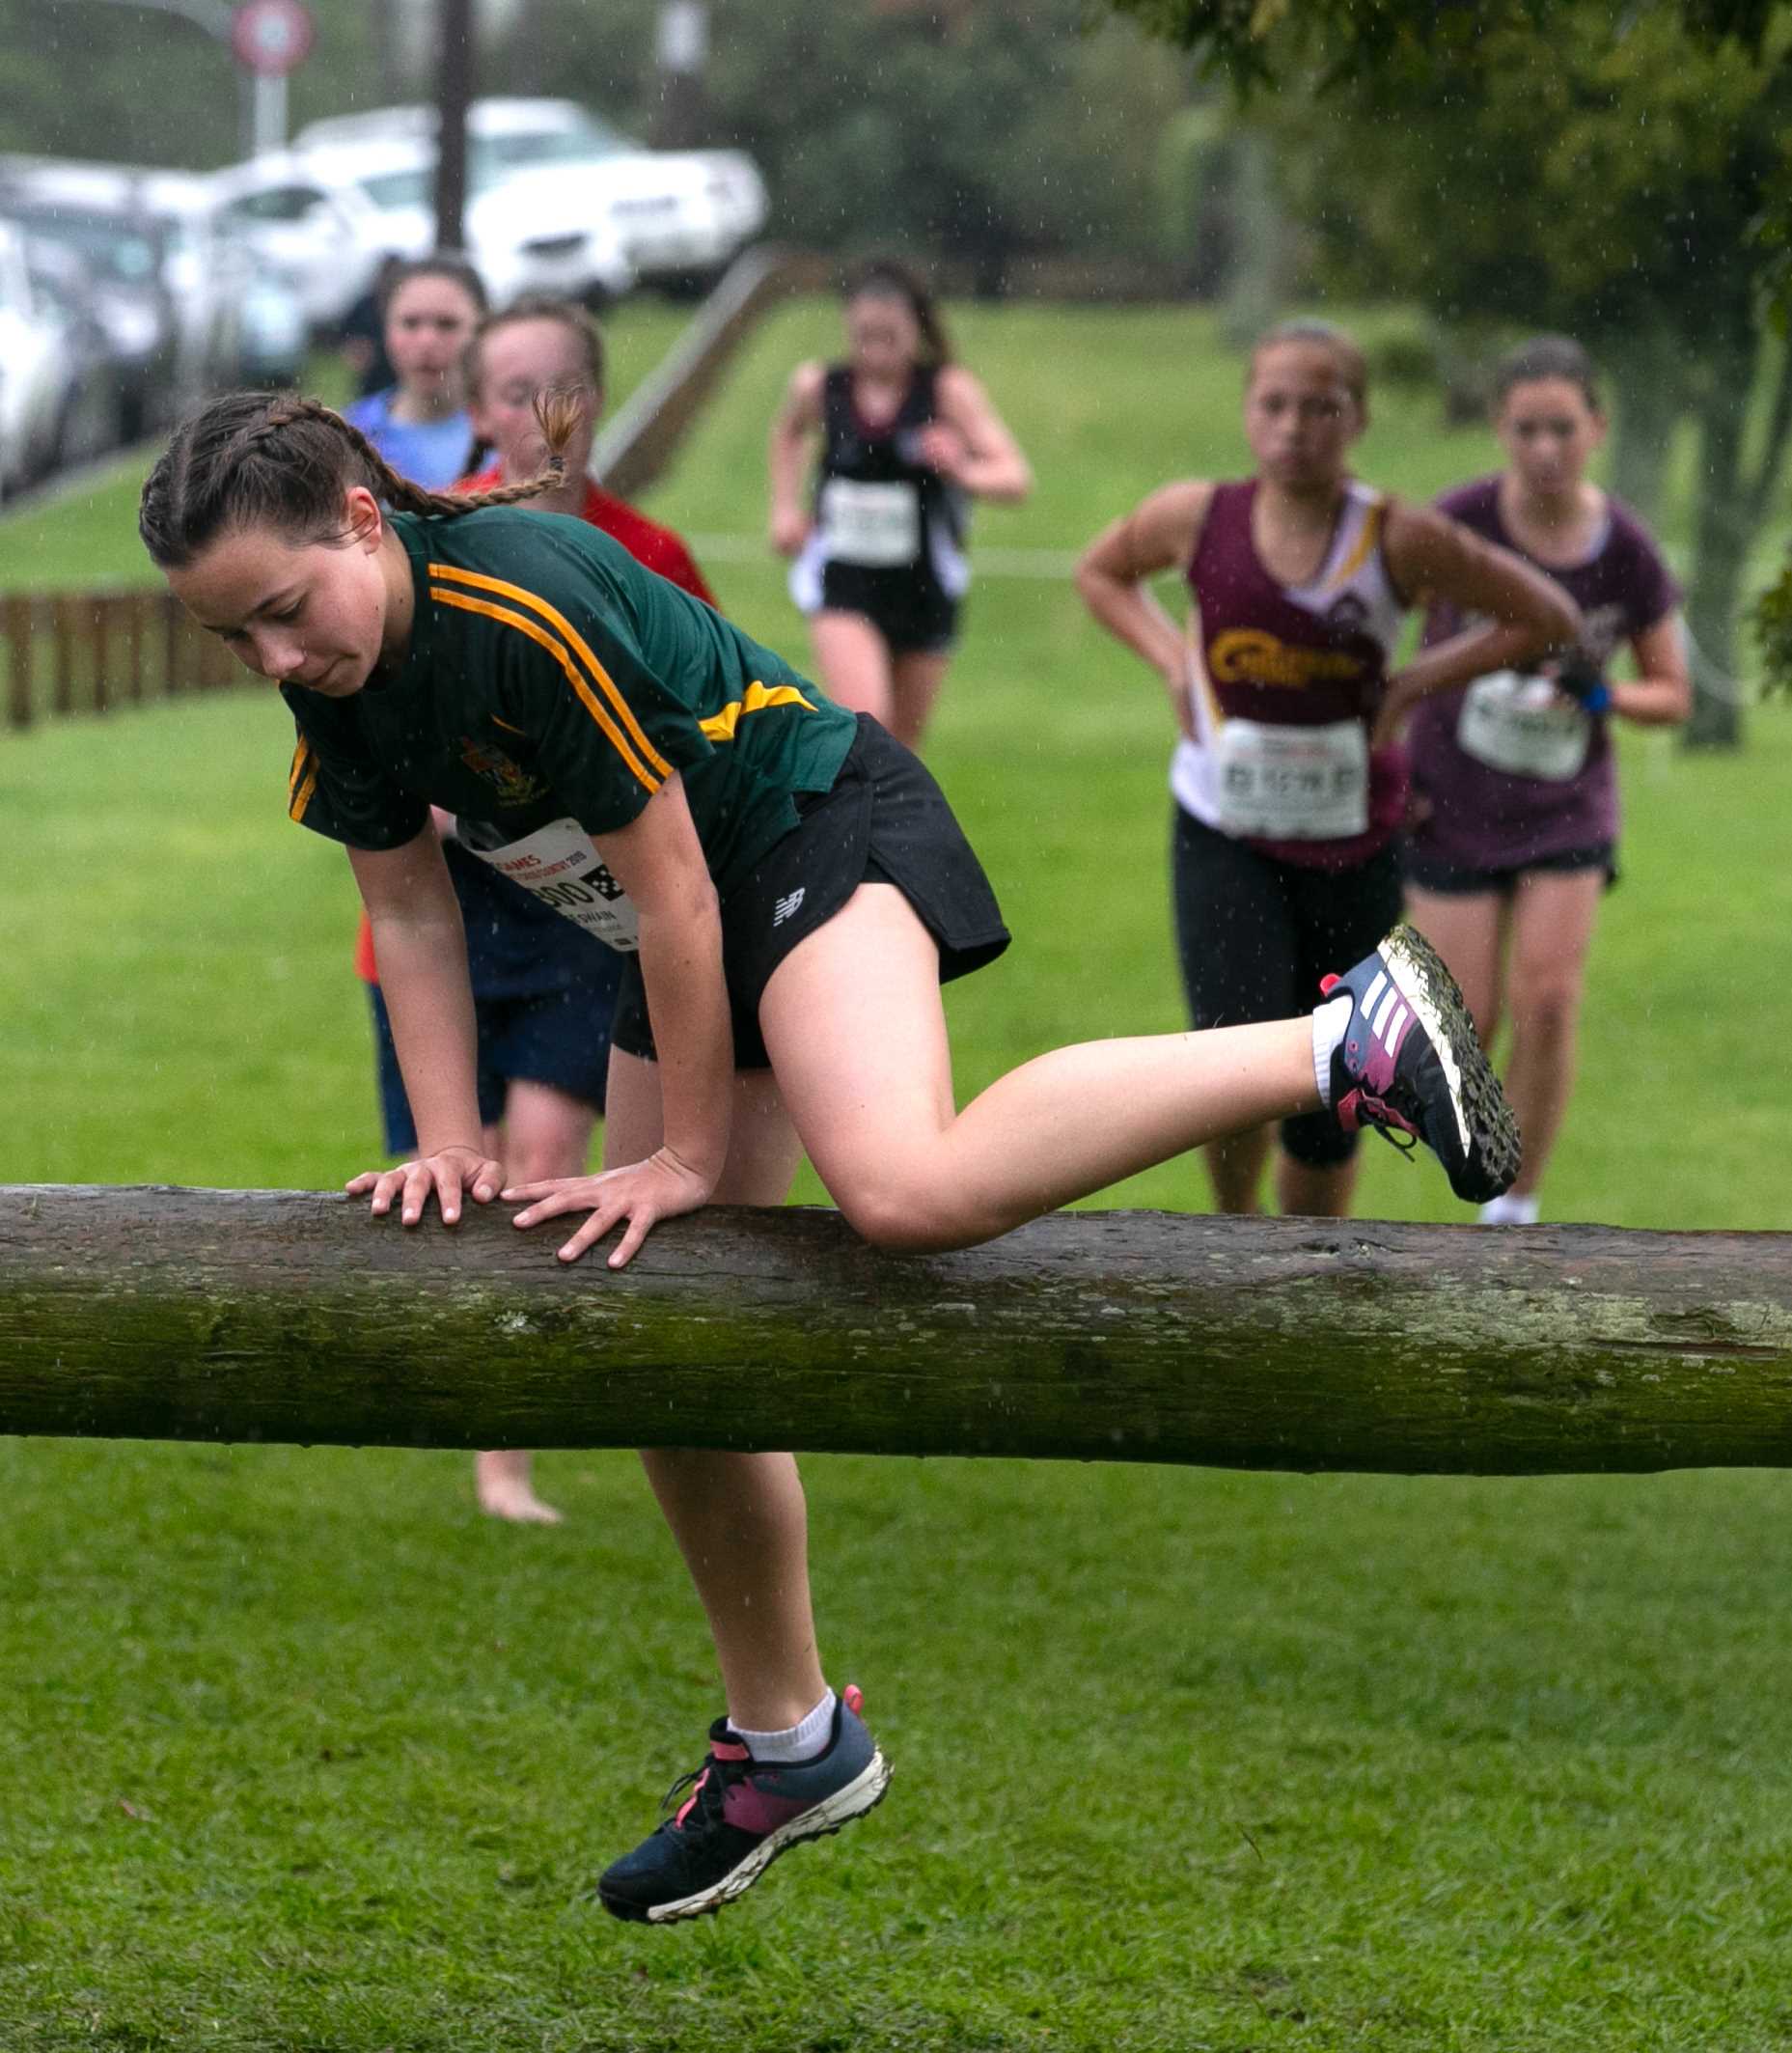 Action from the 2019 Anchor AIMS Games cross country event at Waipuna Park in Tauranga.